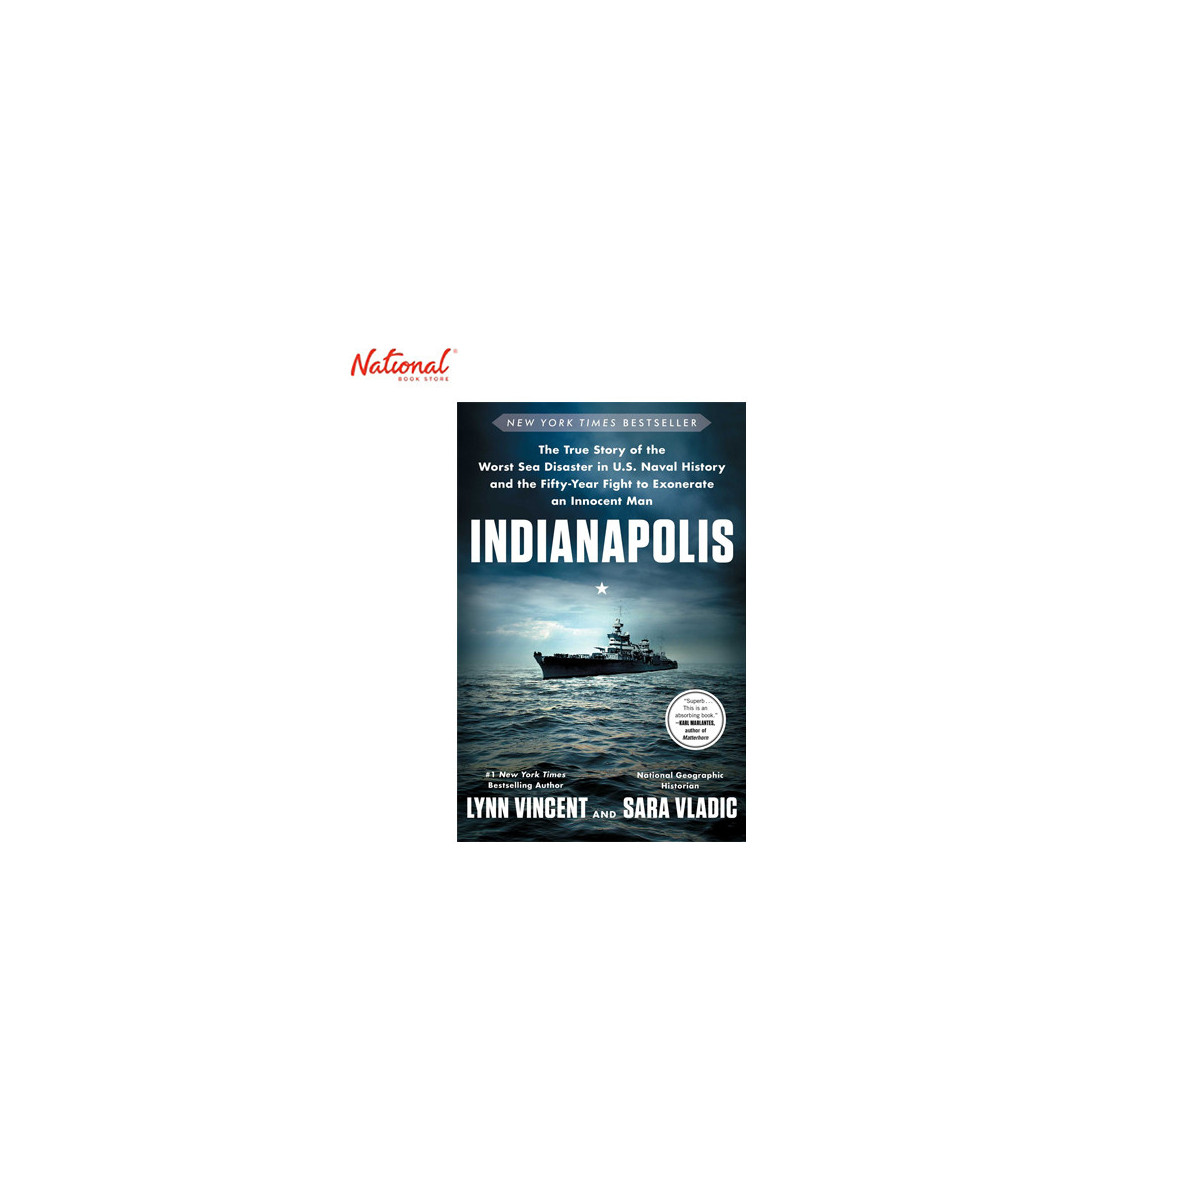 Indianapolis Hardcover by Lynn Vincent